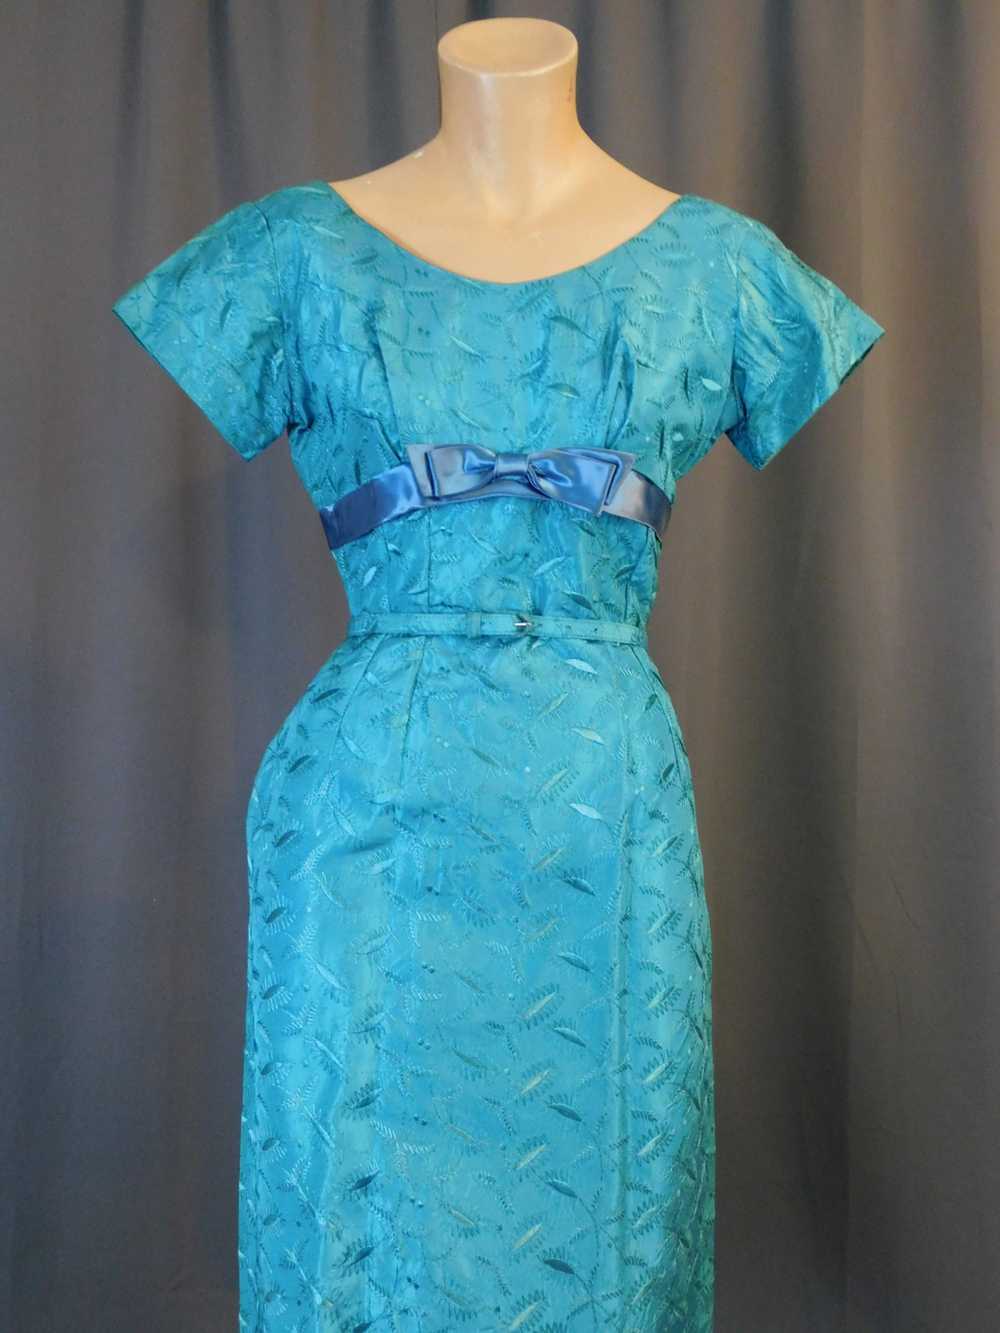 Vintage Embroidered Turquoise Dress 1950s 1960s, … - image 3